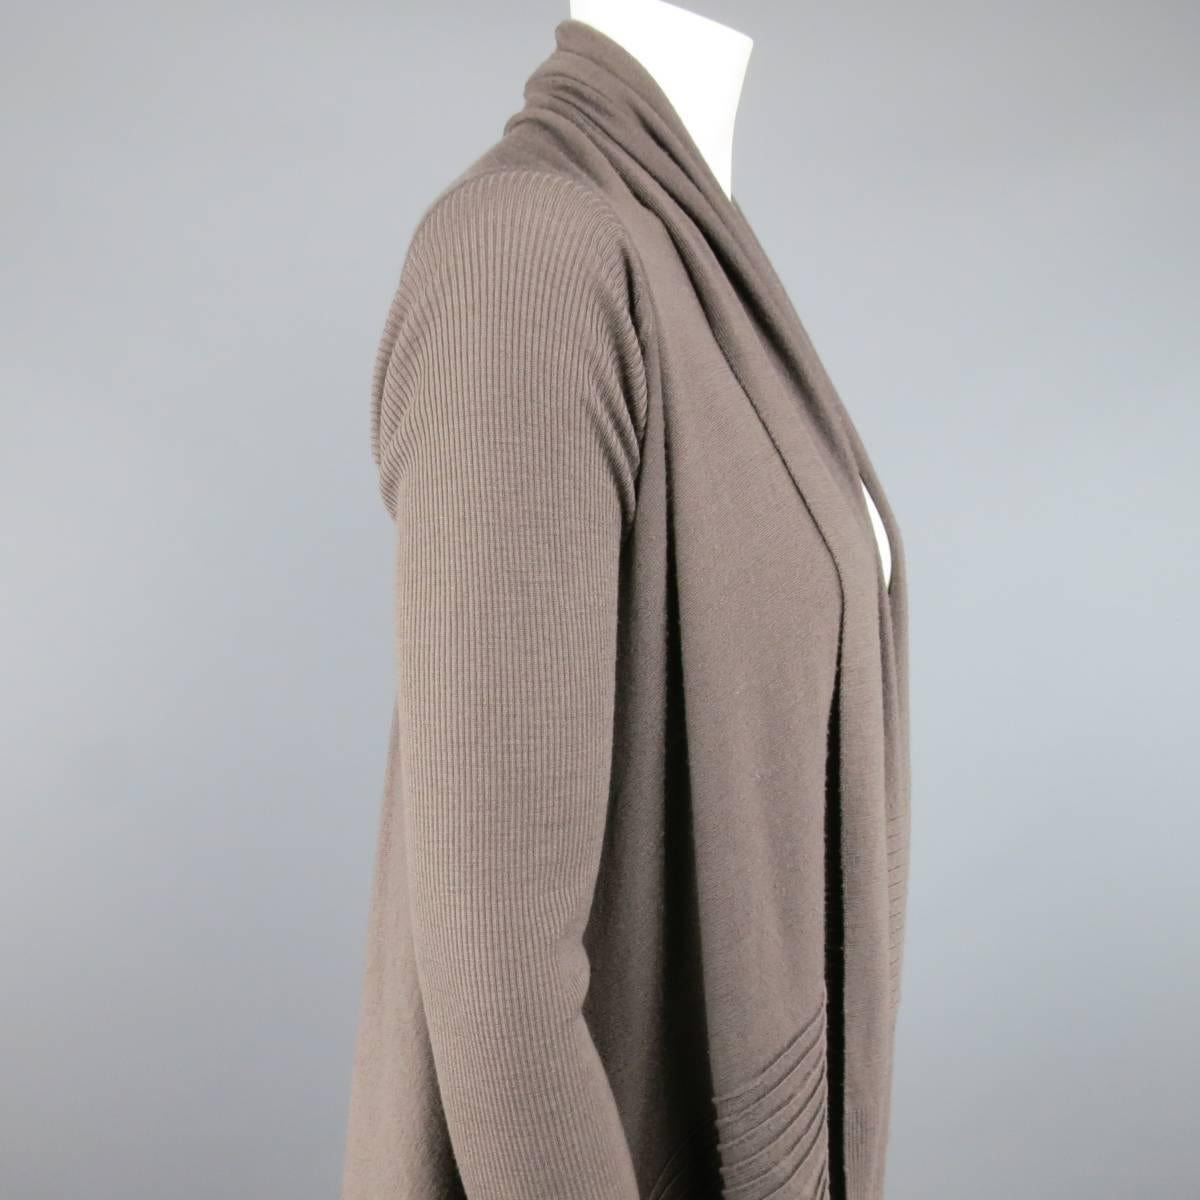 RICK OWENS Cardigan - Women's 2013 - Size S Taupe Ribbed Sleeve Draped 1